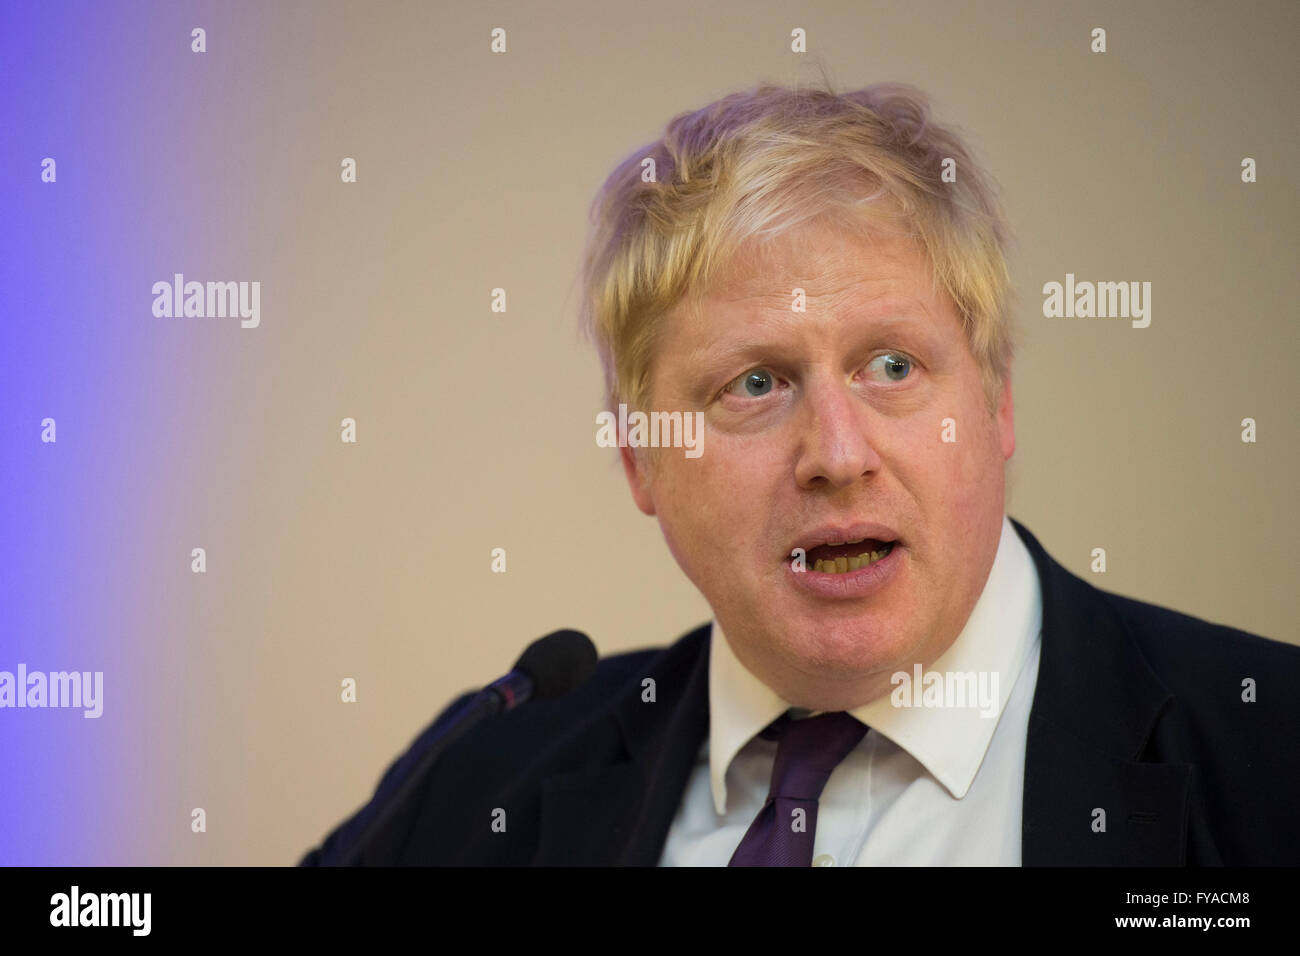 Boris Johnson Conservative MP and former Mayor of London. Boris Johnson campaigned for Britain to leave the EU in referendum. Stock Photo